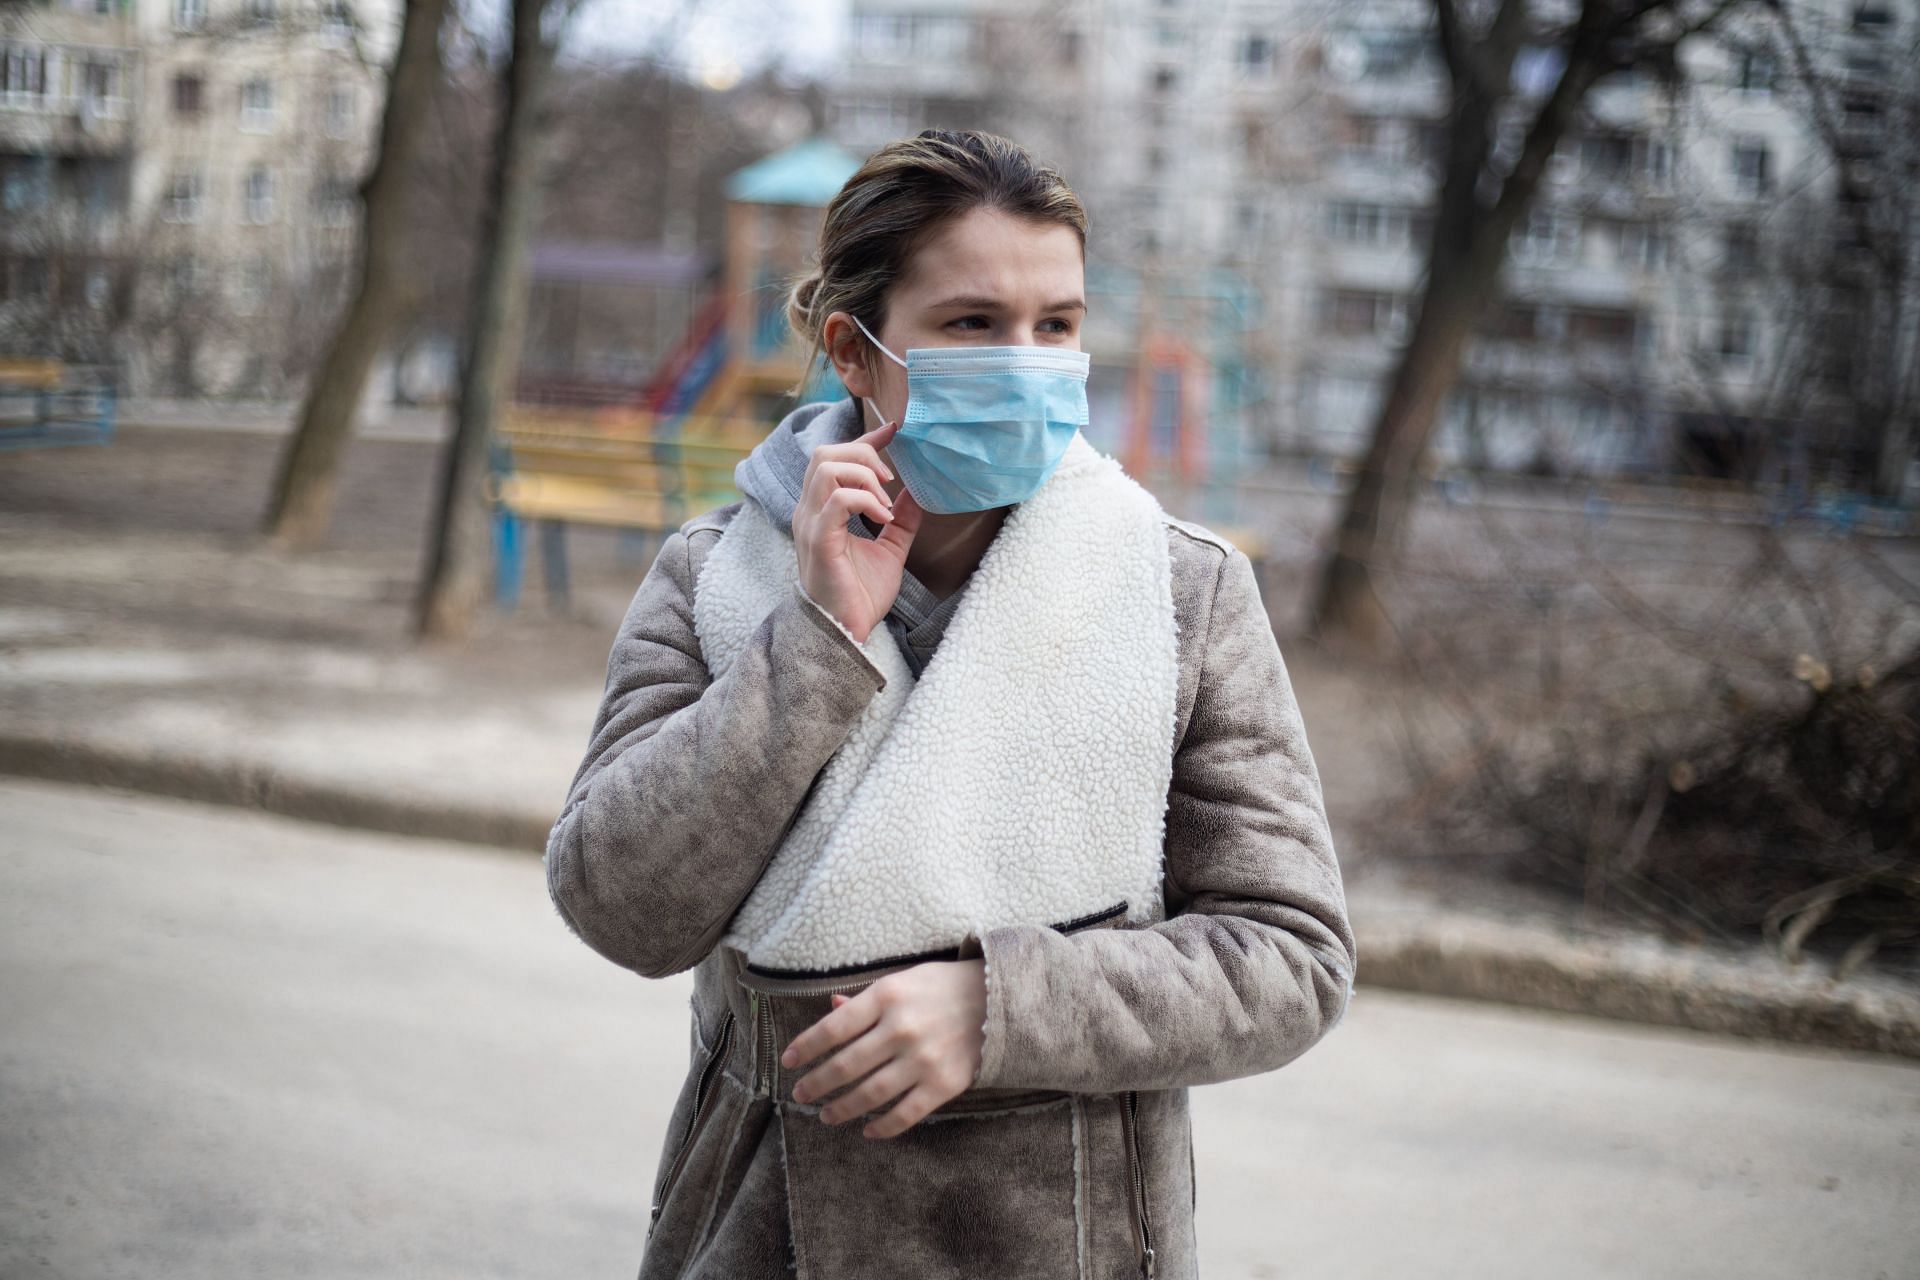 How to get rid of mucus in lungs naturally (image sourced via Pexels / Photo by evg)